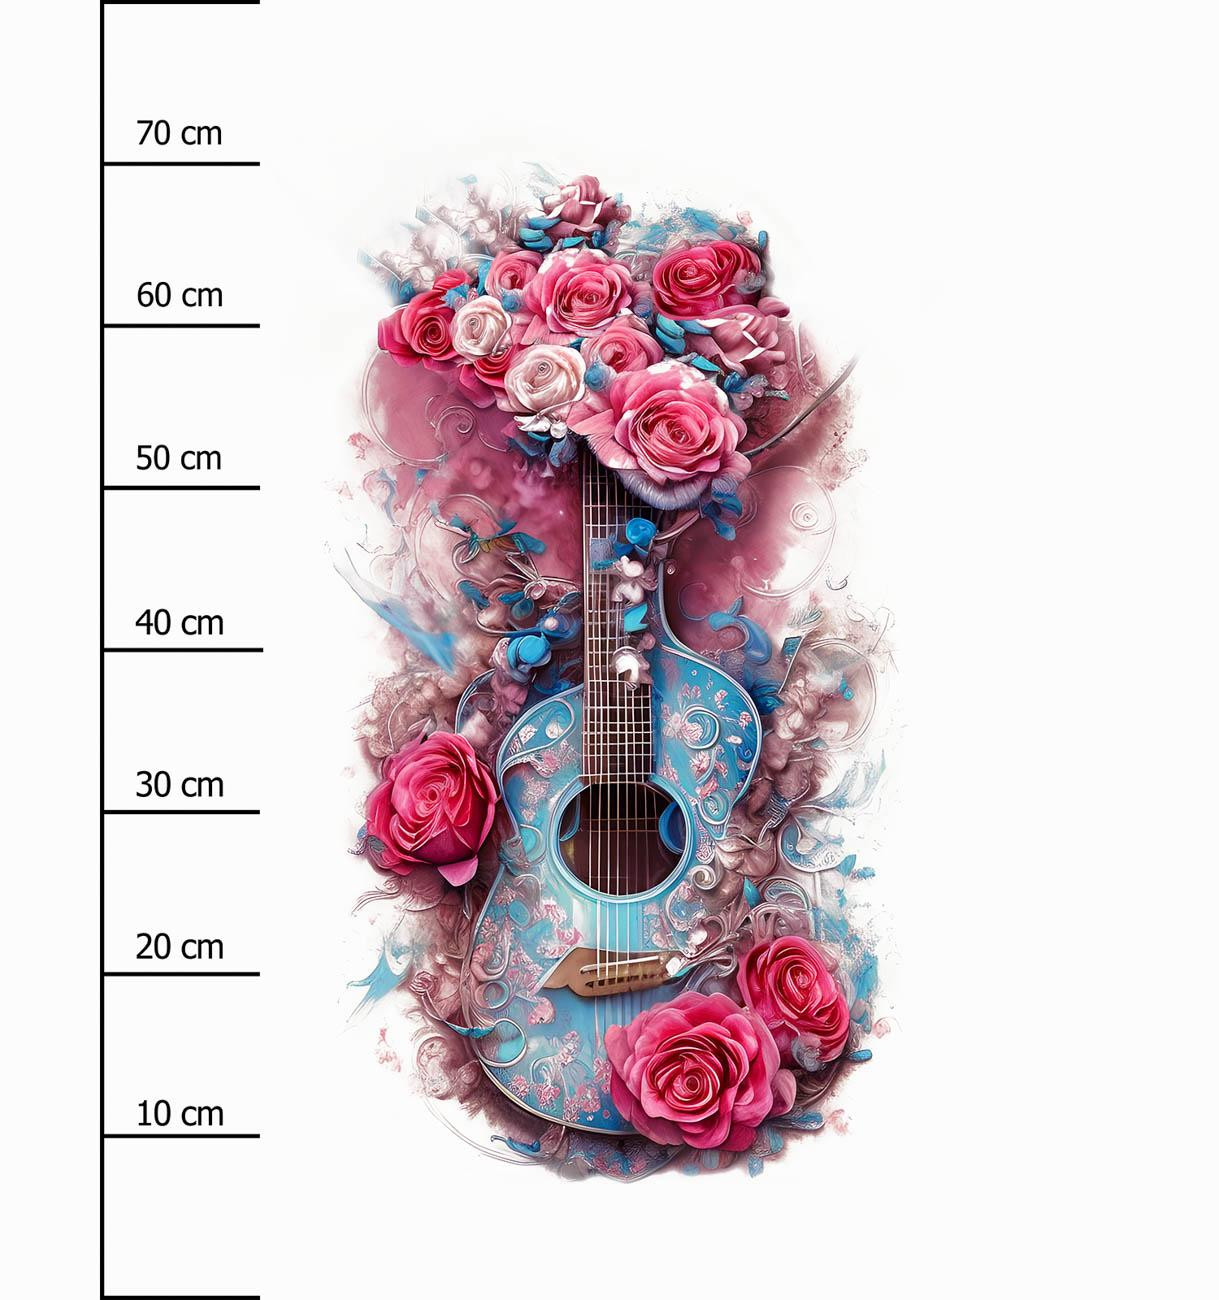 GUITAR WITH ROSES - panel (75cm x 80cm) brushed knitwear with elastane ITY